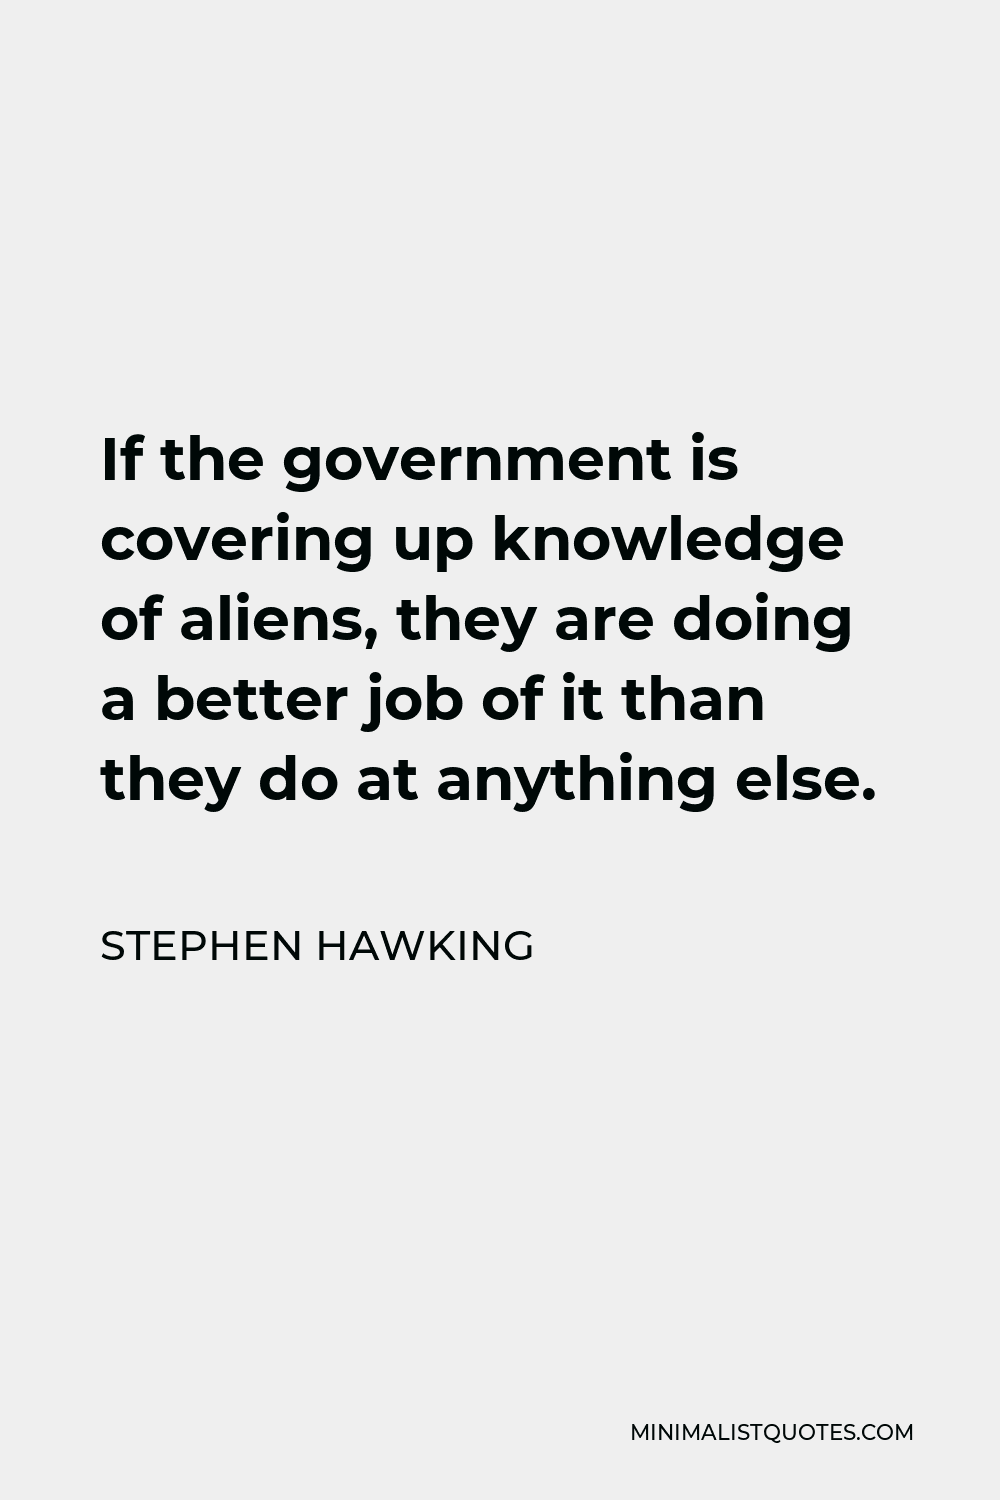 Stephen Hawking Quote - If the government is covering up knowledge of aliens, they are doing a better job of it than they do at anything else.